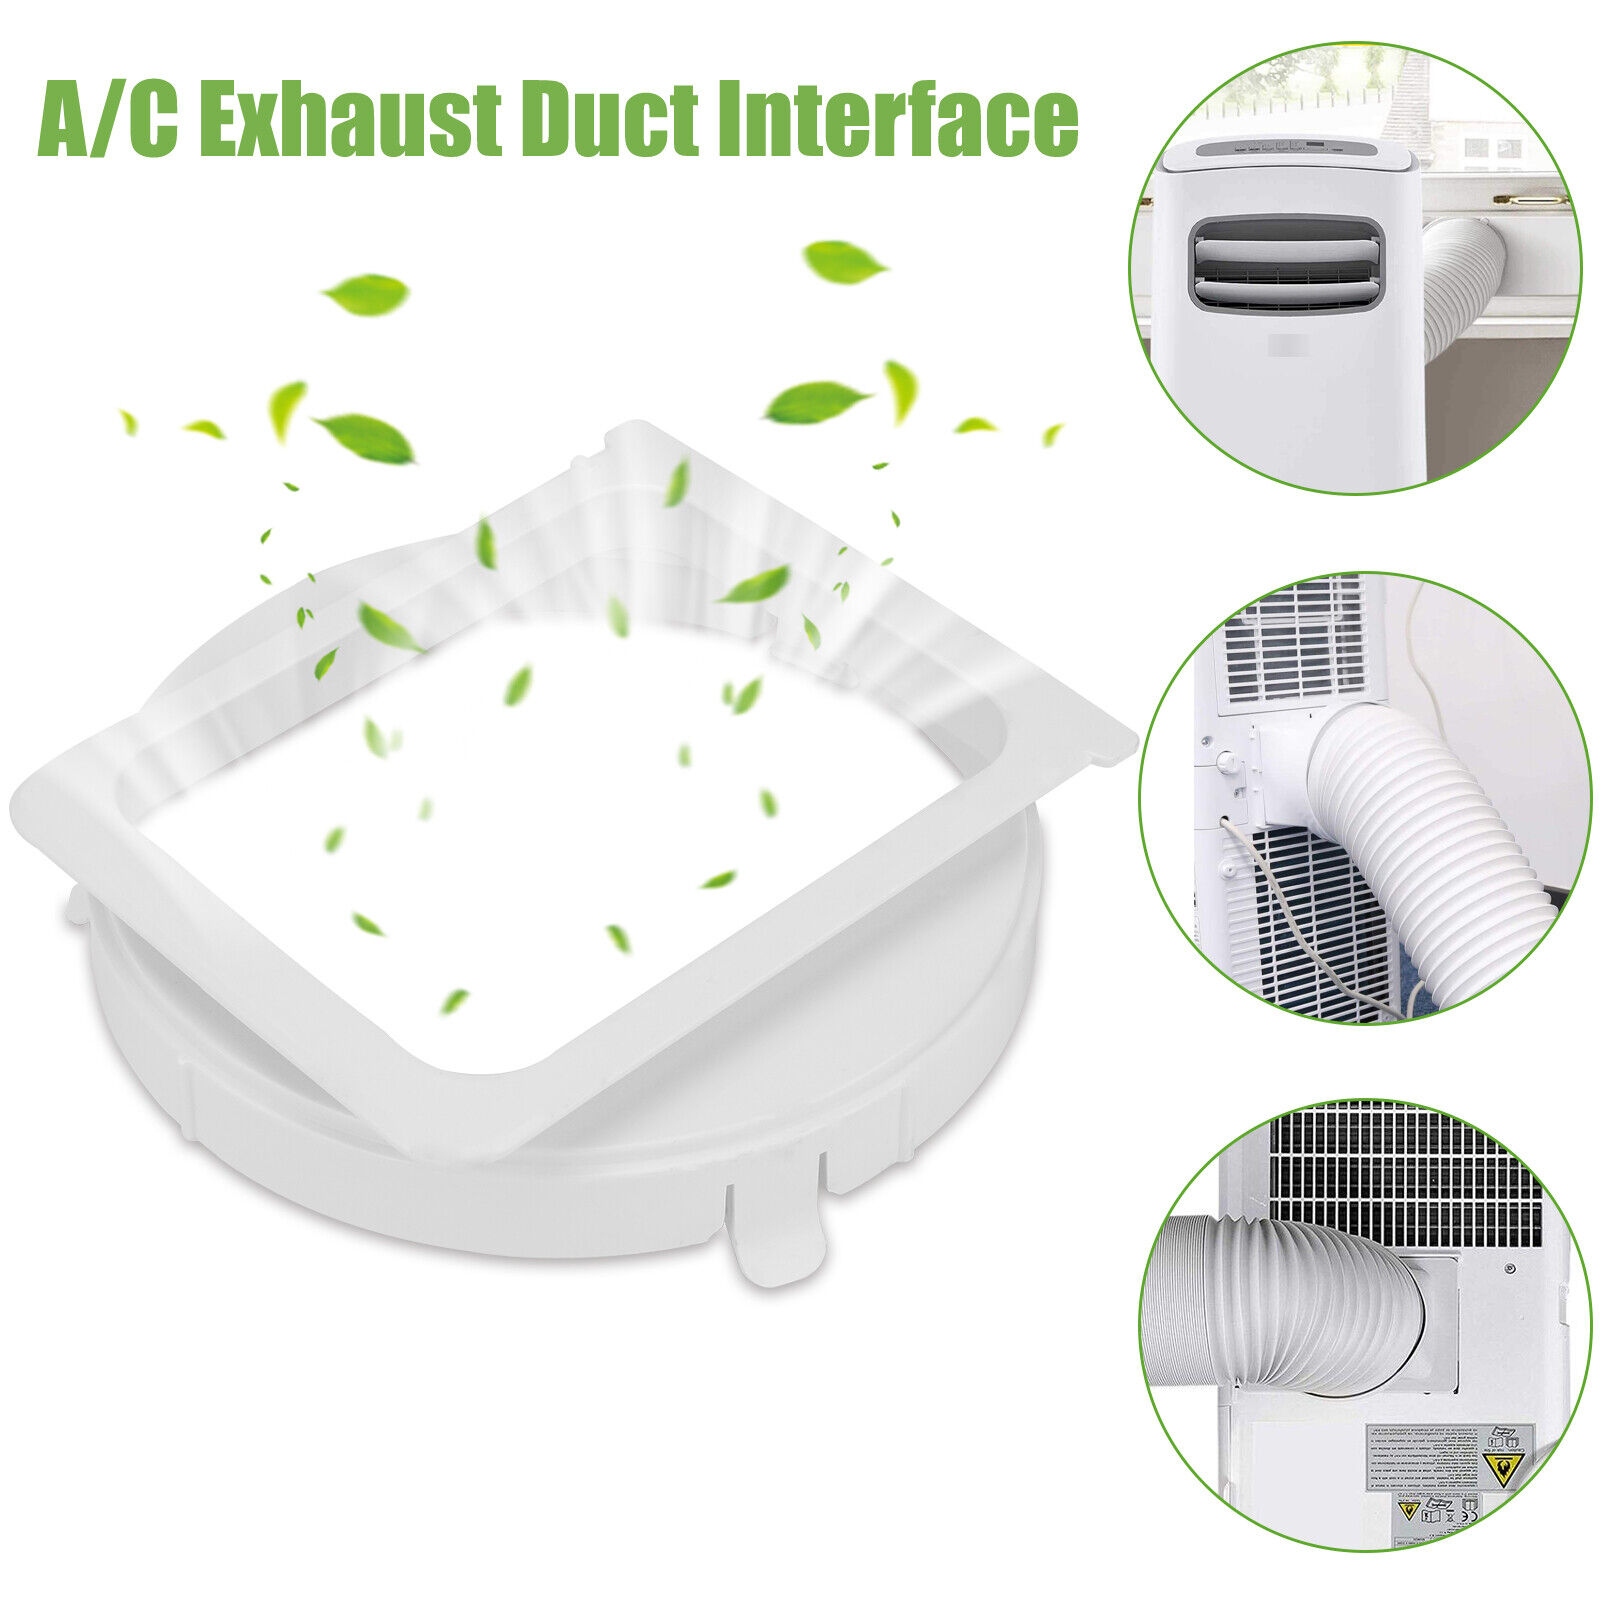 EEEKit Exhaust Duct Interface for Portable Air Conditioner A/C Hose Tube Pipe Connector